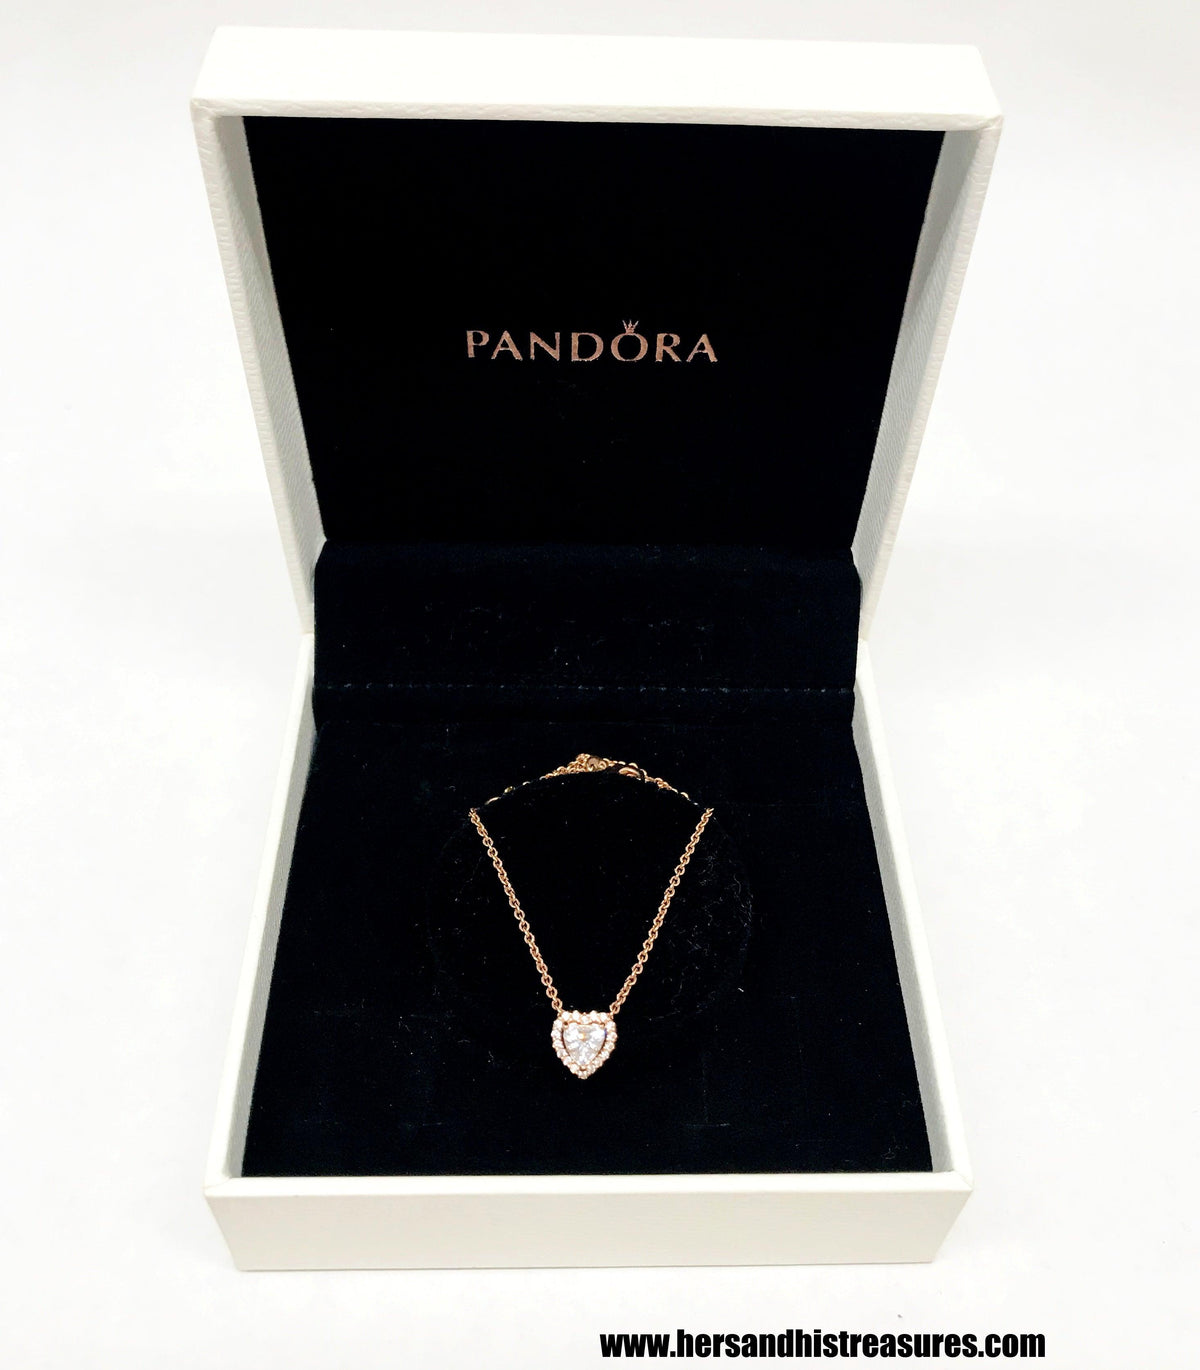 Pandora Elevated Heart Collier Rose Gold Sterling Silver Necklace - Hers and His Treasures